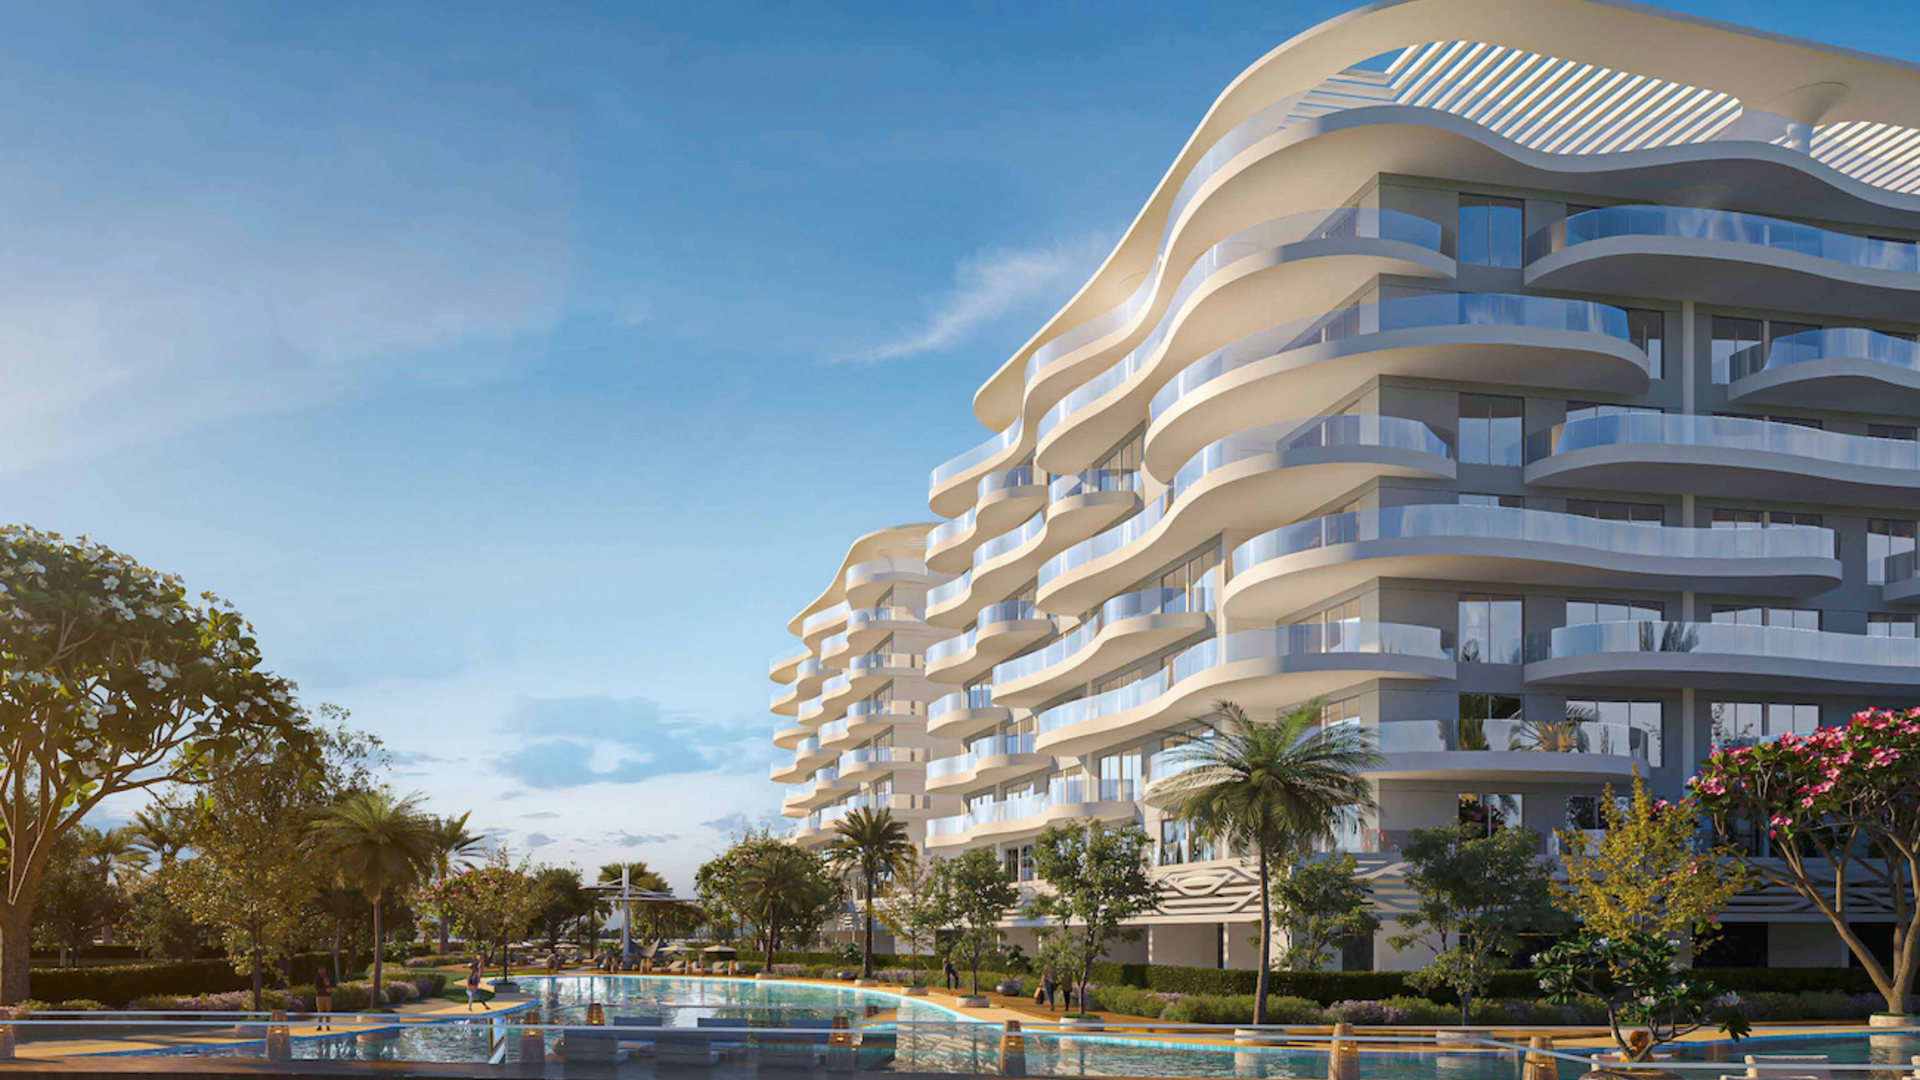 A residential complex surrounded by lagoons inspired by the Mediterranean Sea